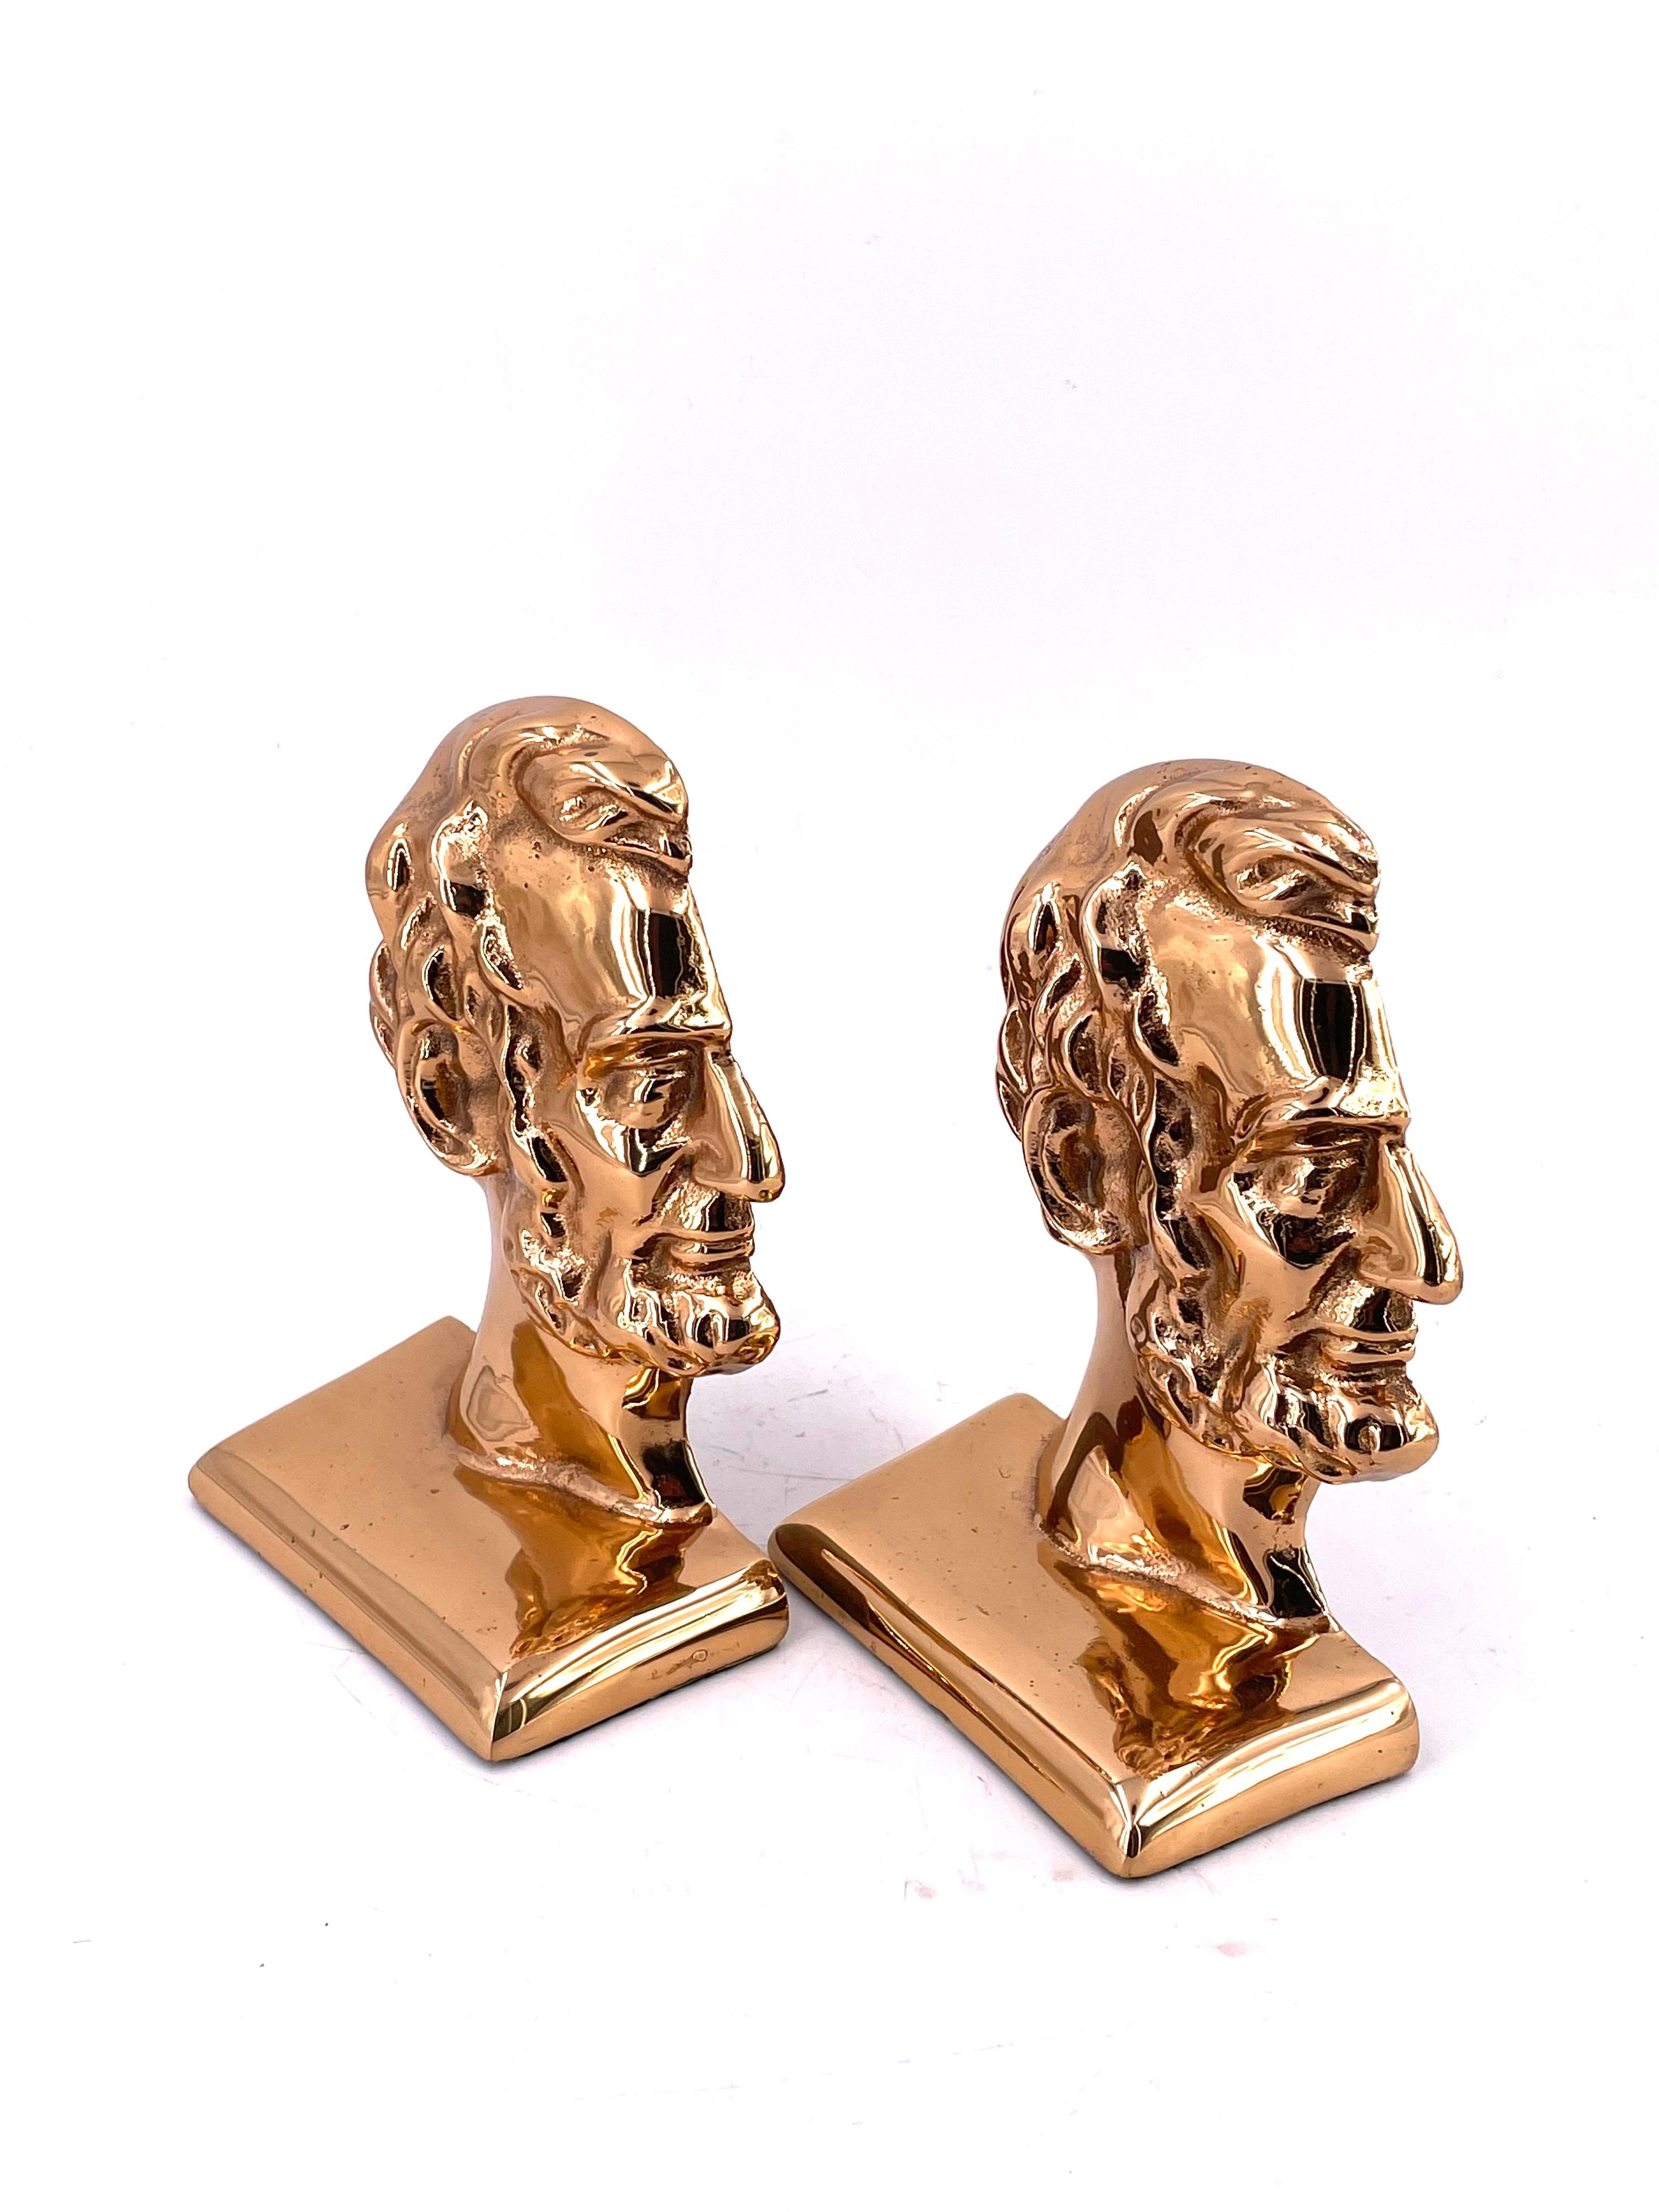 American Great & Unique Rose Brass Plated Solid Cast Iron Pair of Lincoln Bookends